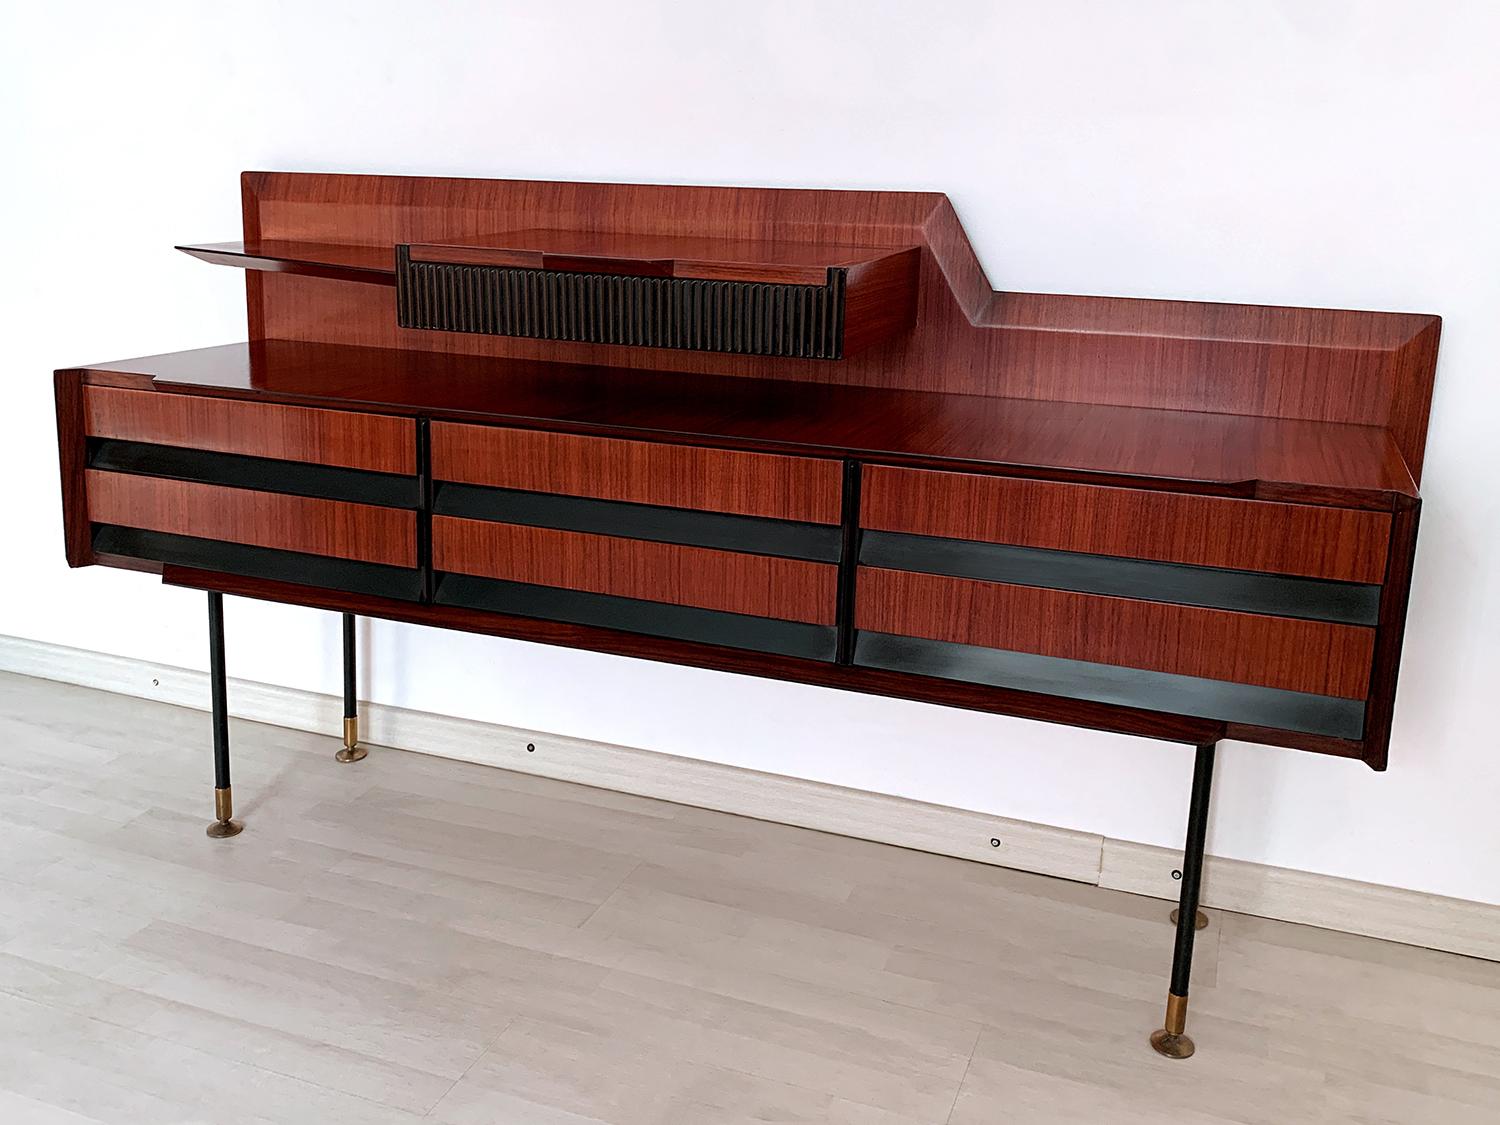 Italian Mid-Century Teak Wood Sideboard with Drawers by Vittorio Dassi, 1950s 4